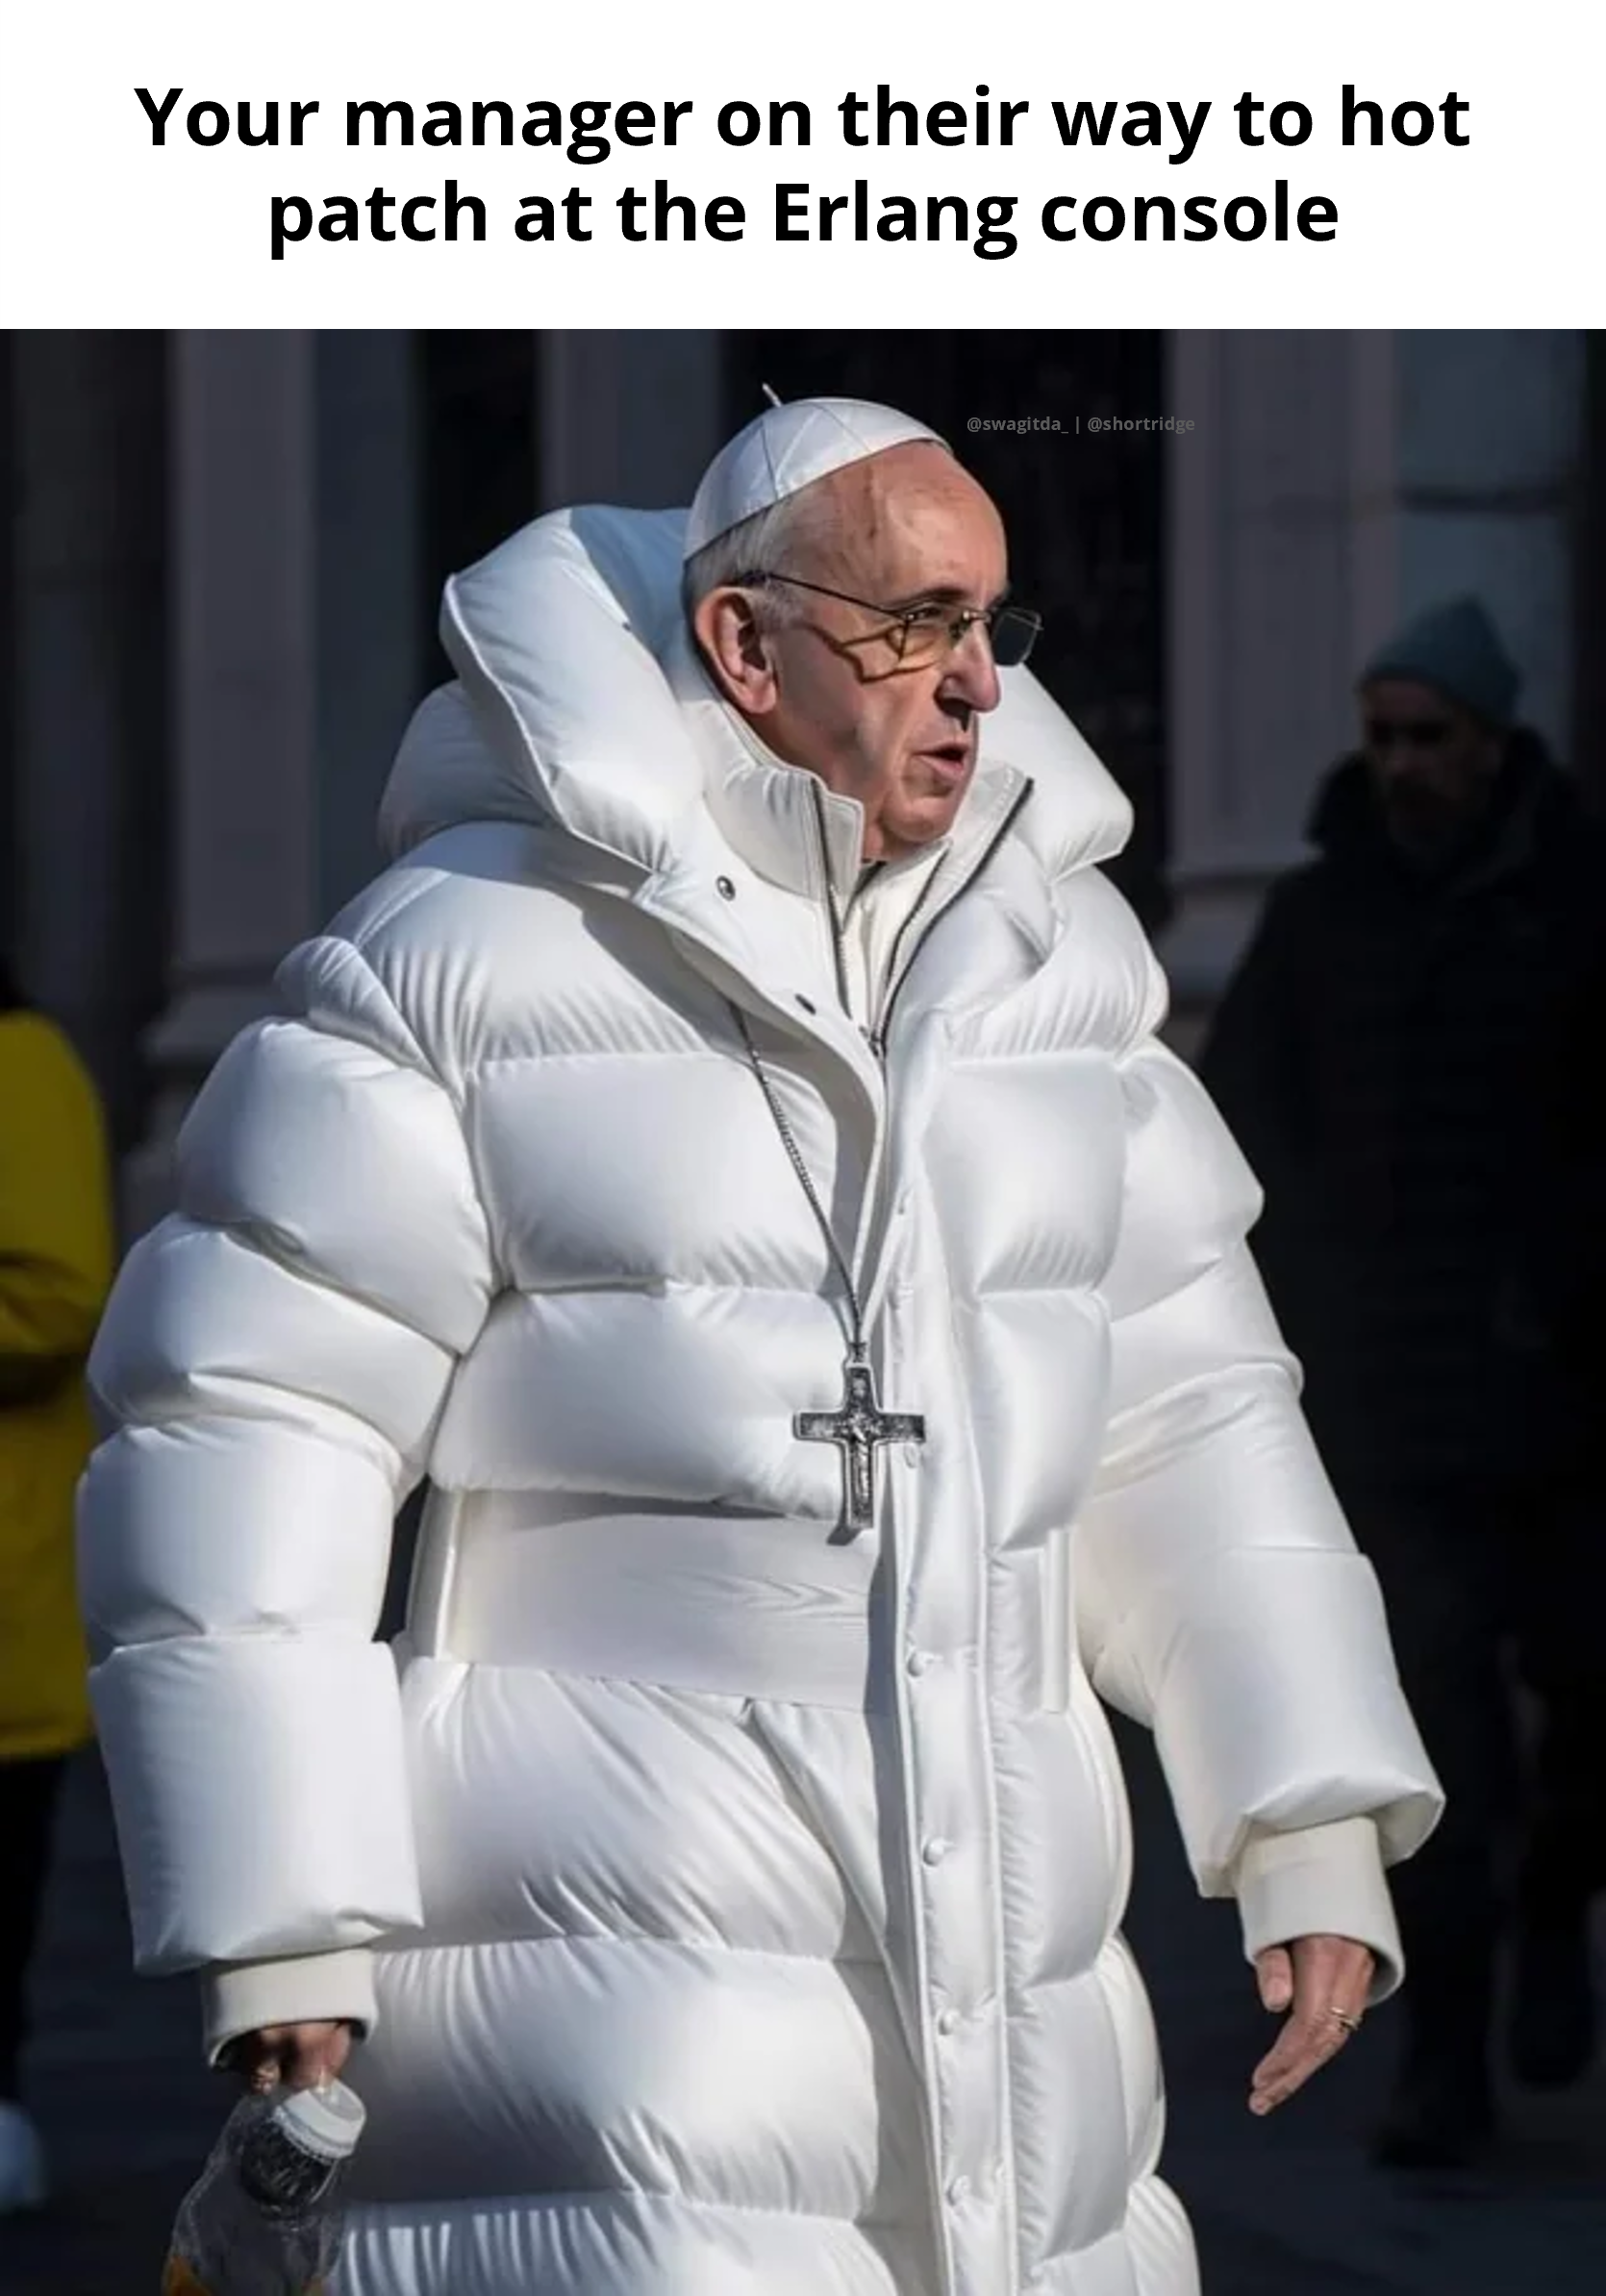 An AI render of the pope wearing a stylish puffy coat, giving him the appearance of a hip hop artist with ample swagger in juxtaposition with his role as pope. The image is captioned: your manager on their way to hot patch at the Erlang console.